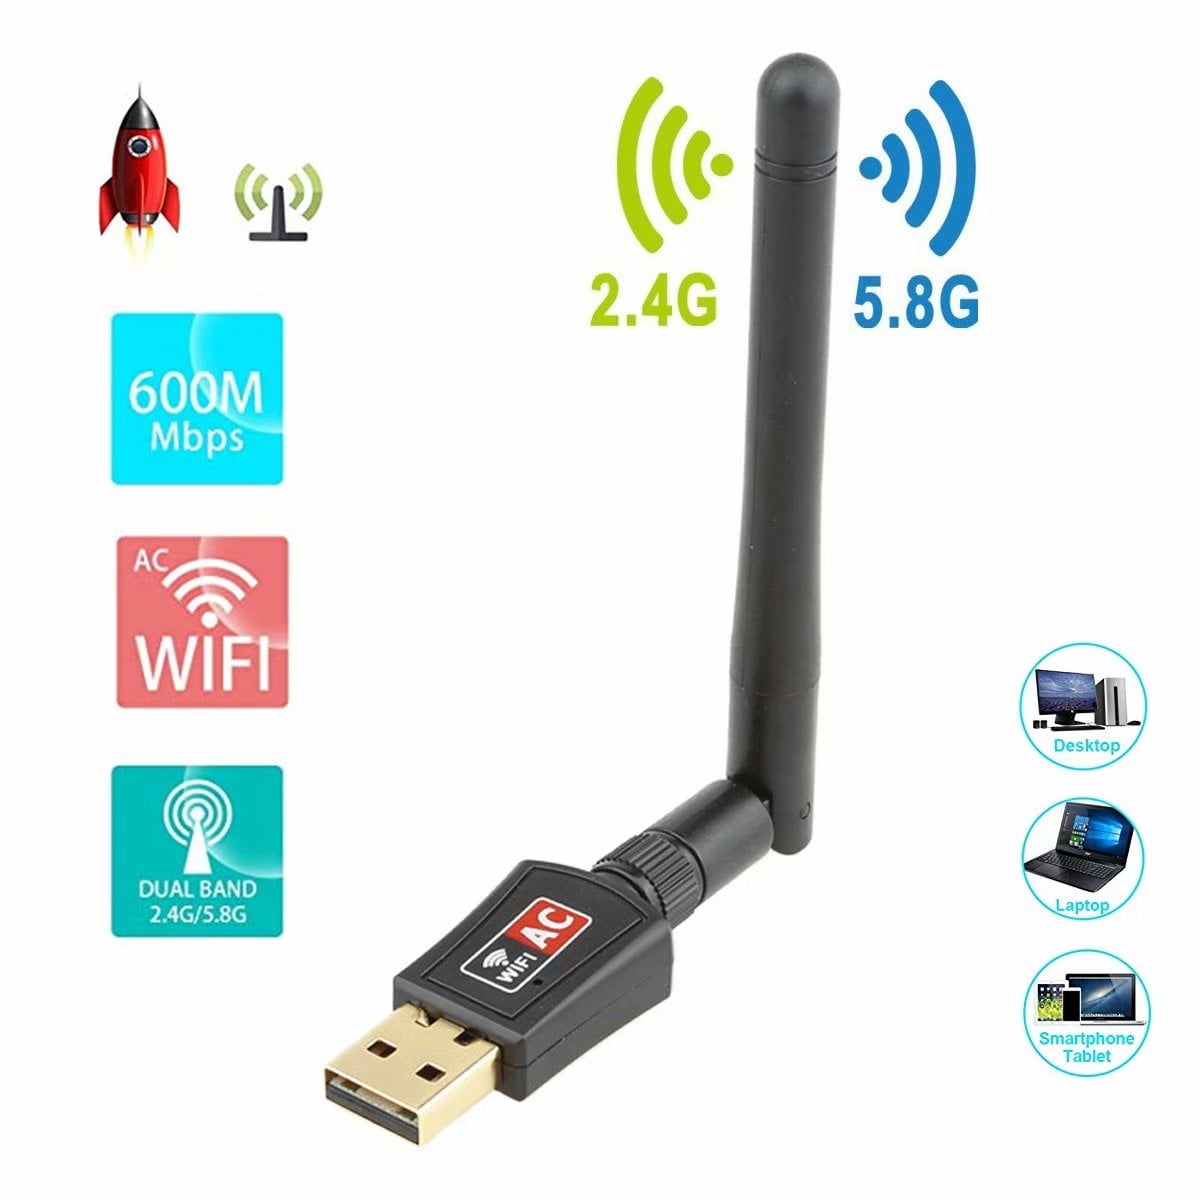 Ejendomsret peregrination fokus USB WiFi Adapter AC600Mbps, USB 2.0 Wireless Network WiFi Dongle with 2dBi  Antenna for for PC/Desktop/Laptop/Mac,Compatible with Windows  10/8.1/8/7/XP/Vista,Mac OS X/Linux - Walmart.com